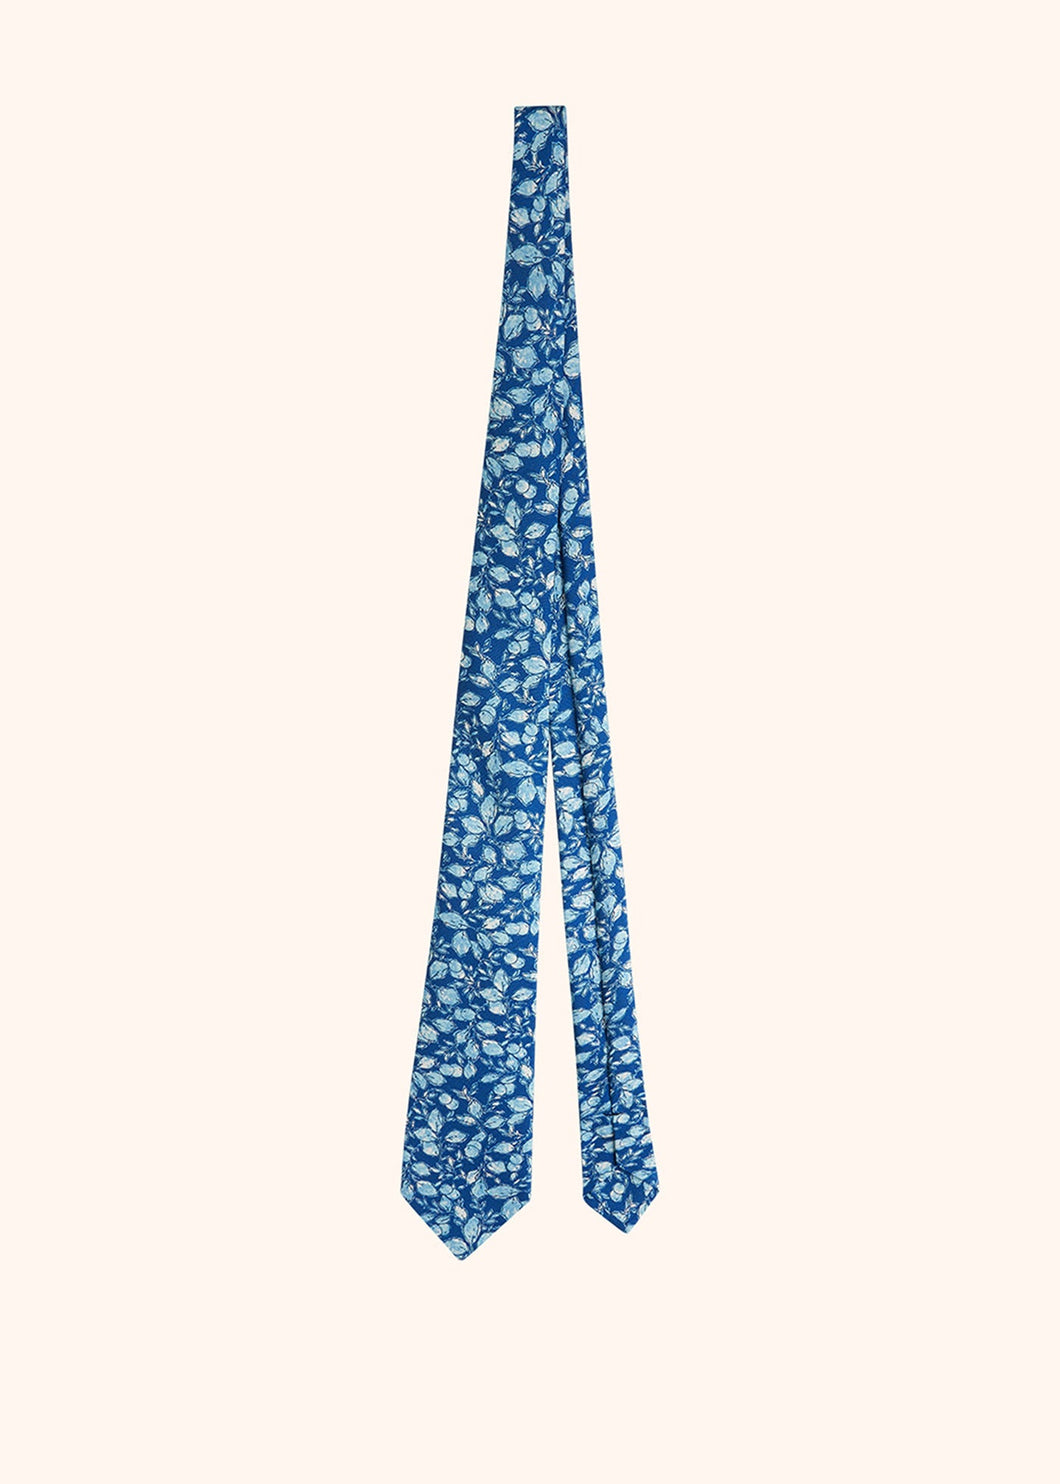 Kiton dark blue, sky blue and white floral design tie for man, made of silk